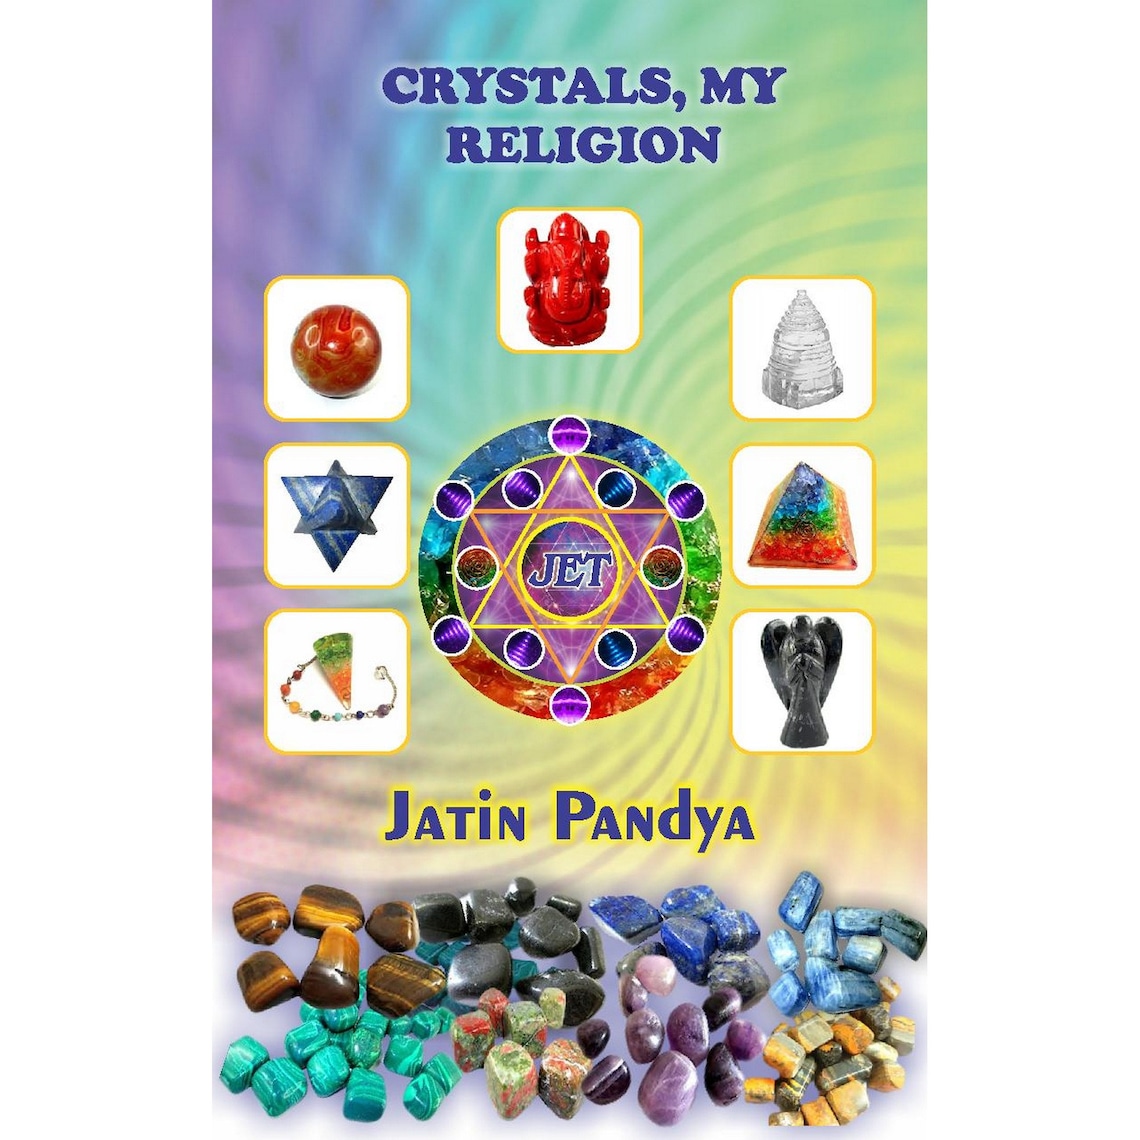 Jet CRYSTALS MY RELIGION 200 Pages E-book image 0